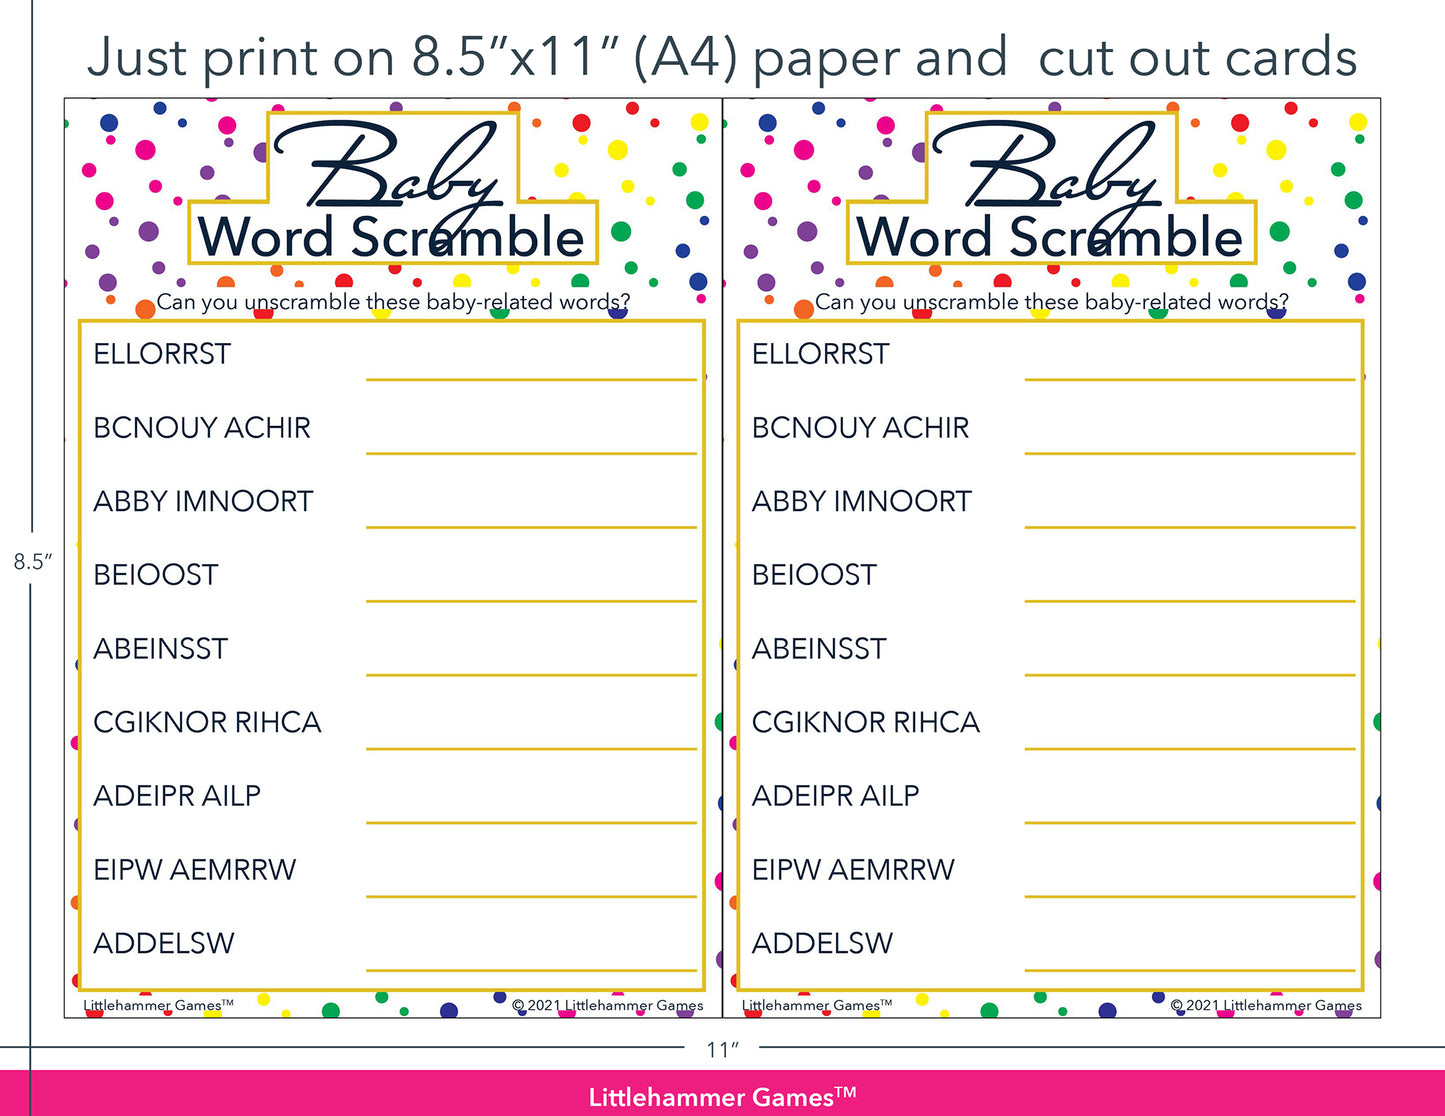 Baby Word Scramble rainbow polka dot game cards with printing instructions